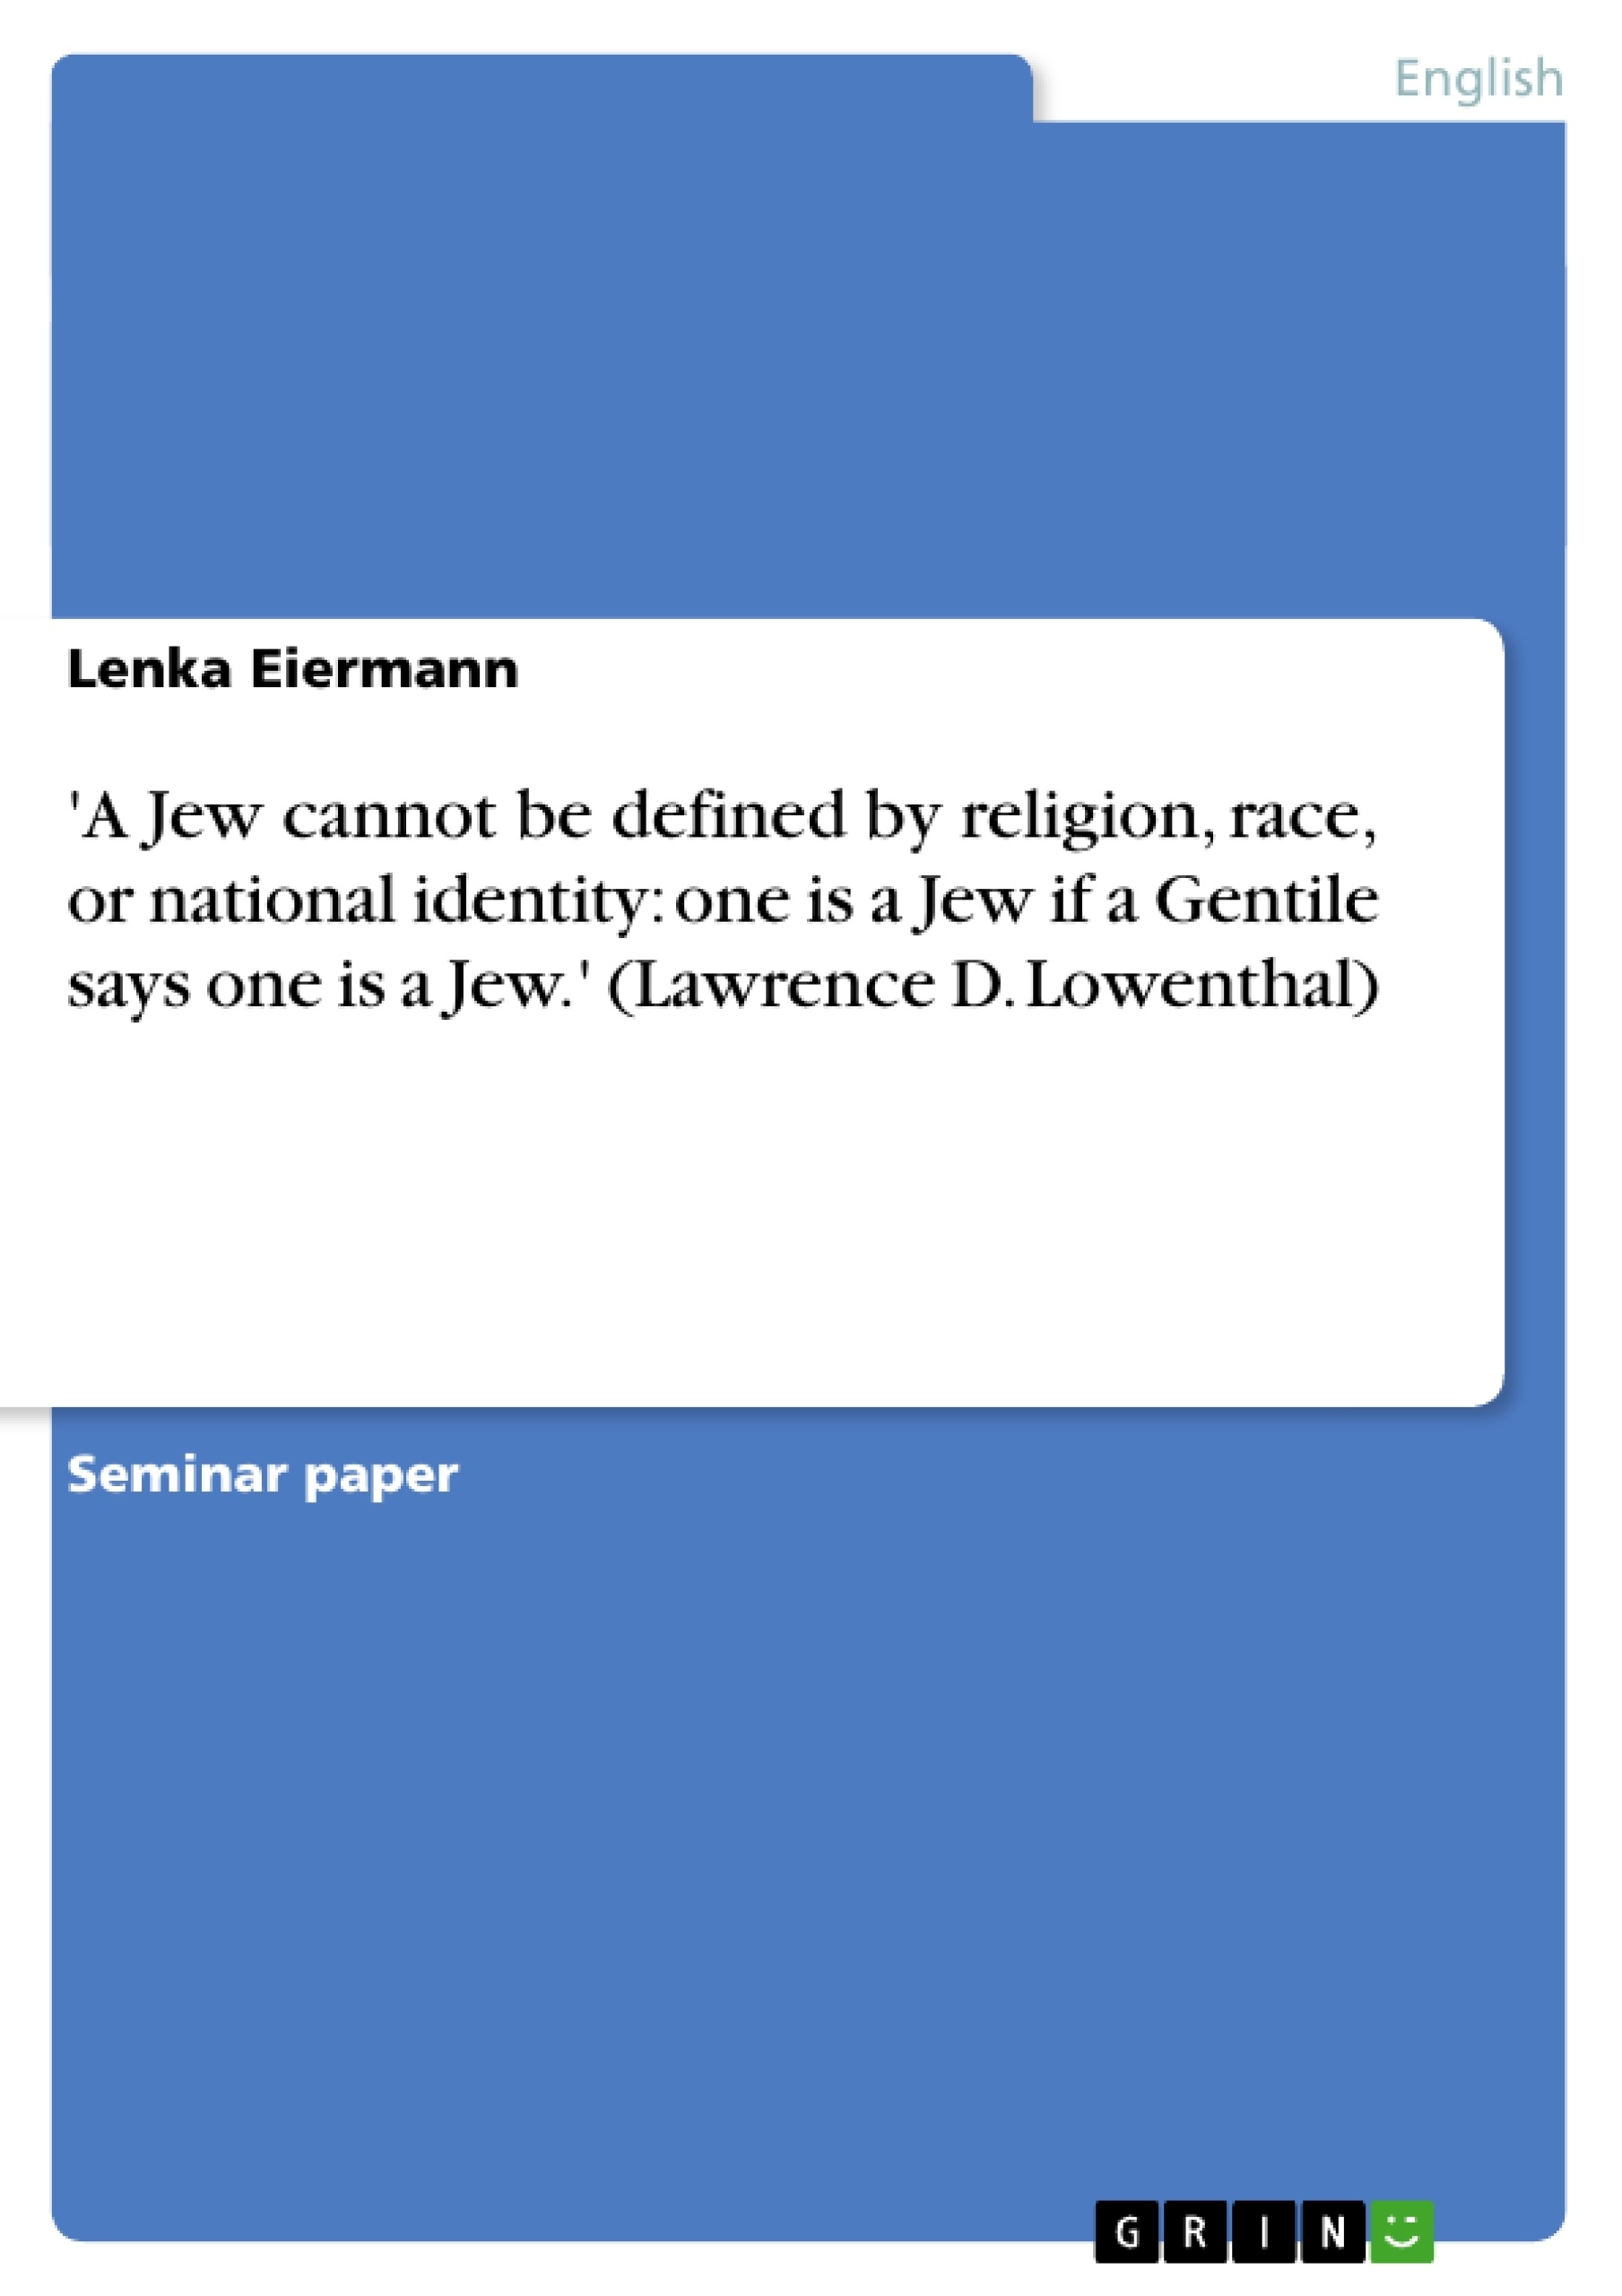 Title: 'A Jew cannot be defined by religion, race, or national identity: one is a Jew if a Gentile says one is a Jew.' (Lawrence D. Lowenthal)